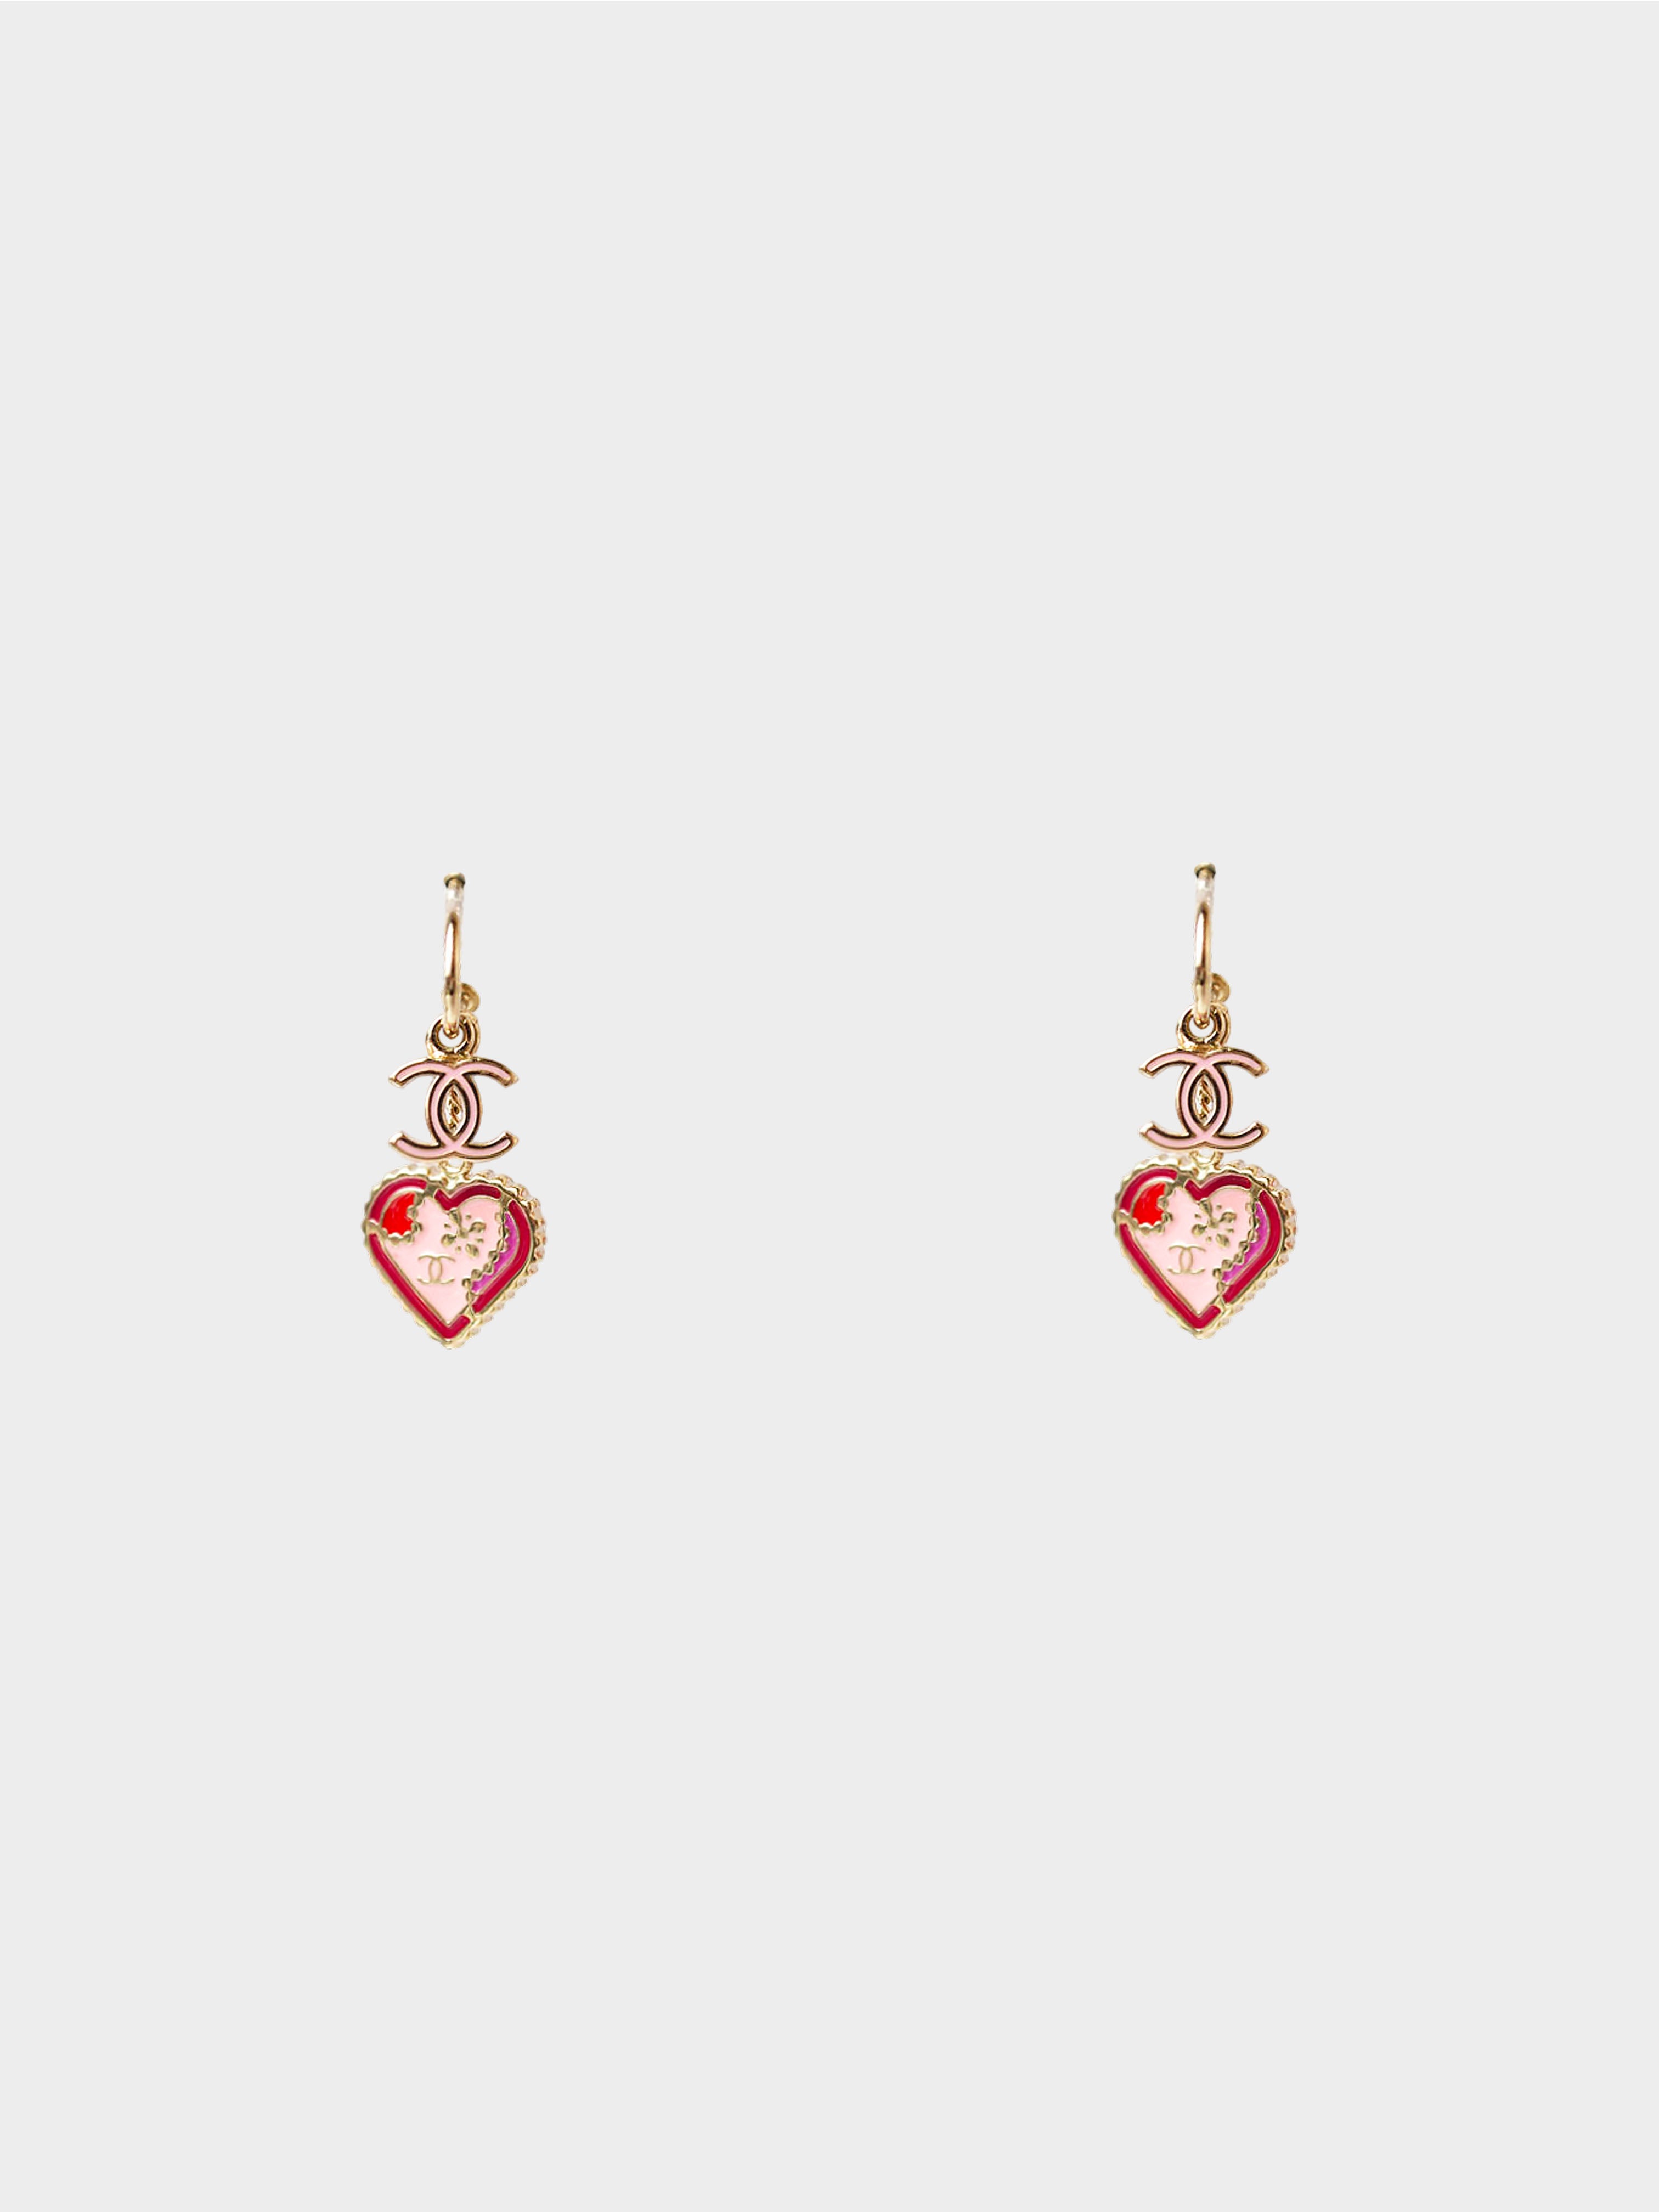 Chanel Spring 2005 Gold and Pink CC Logo and Heart Swing Earrings